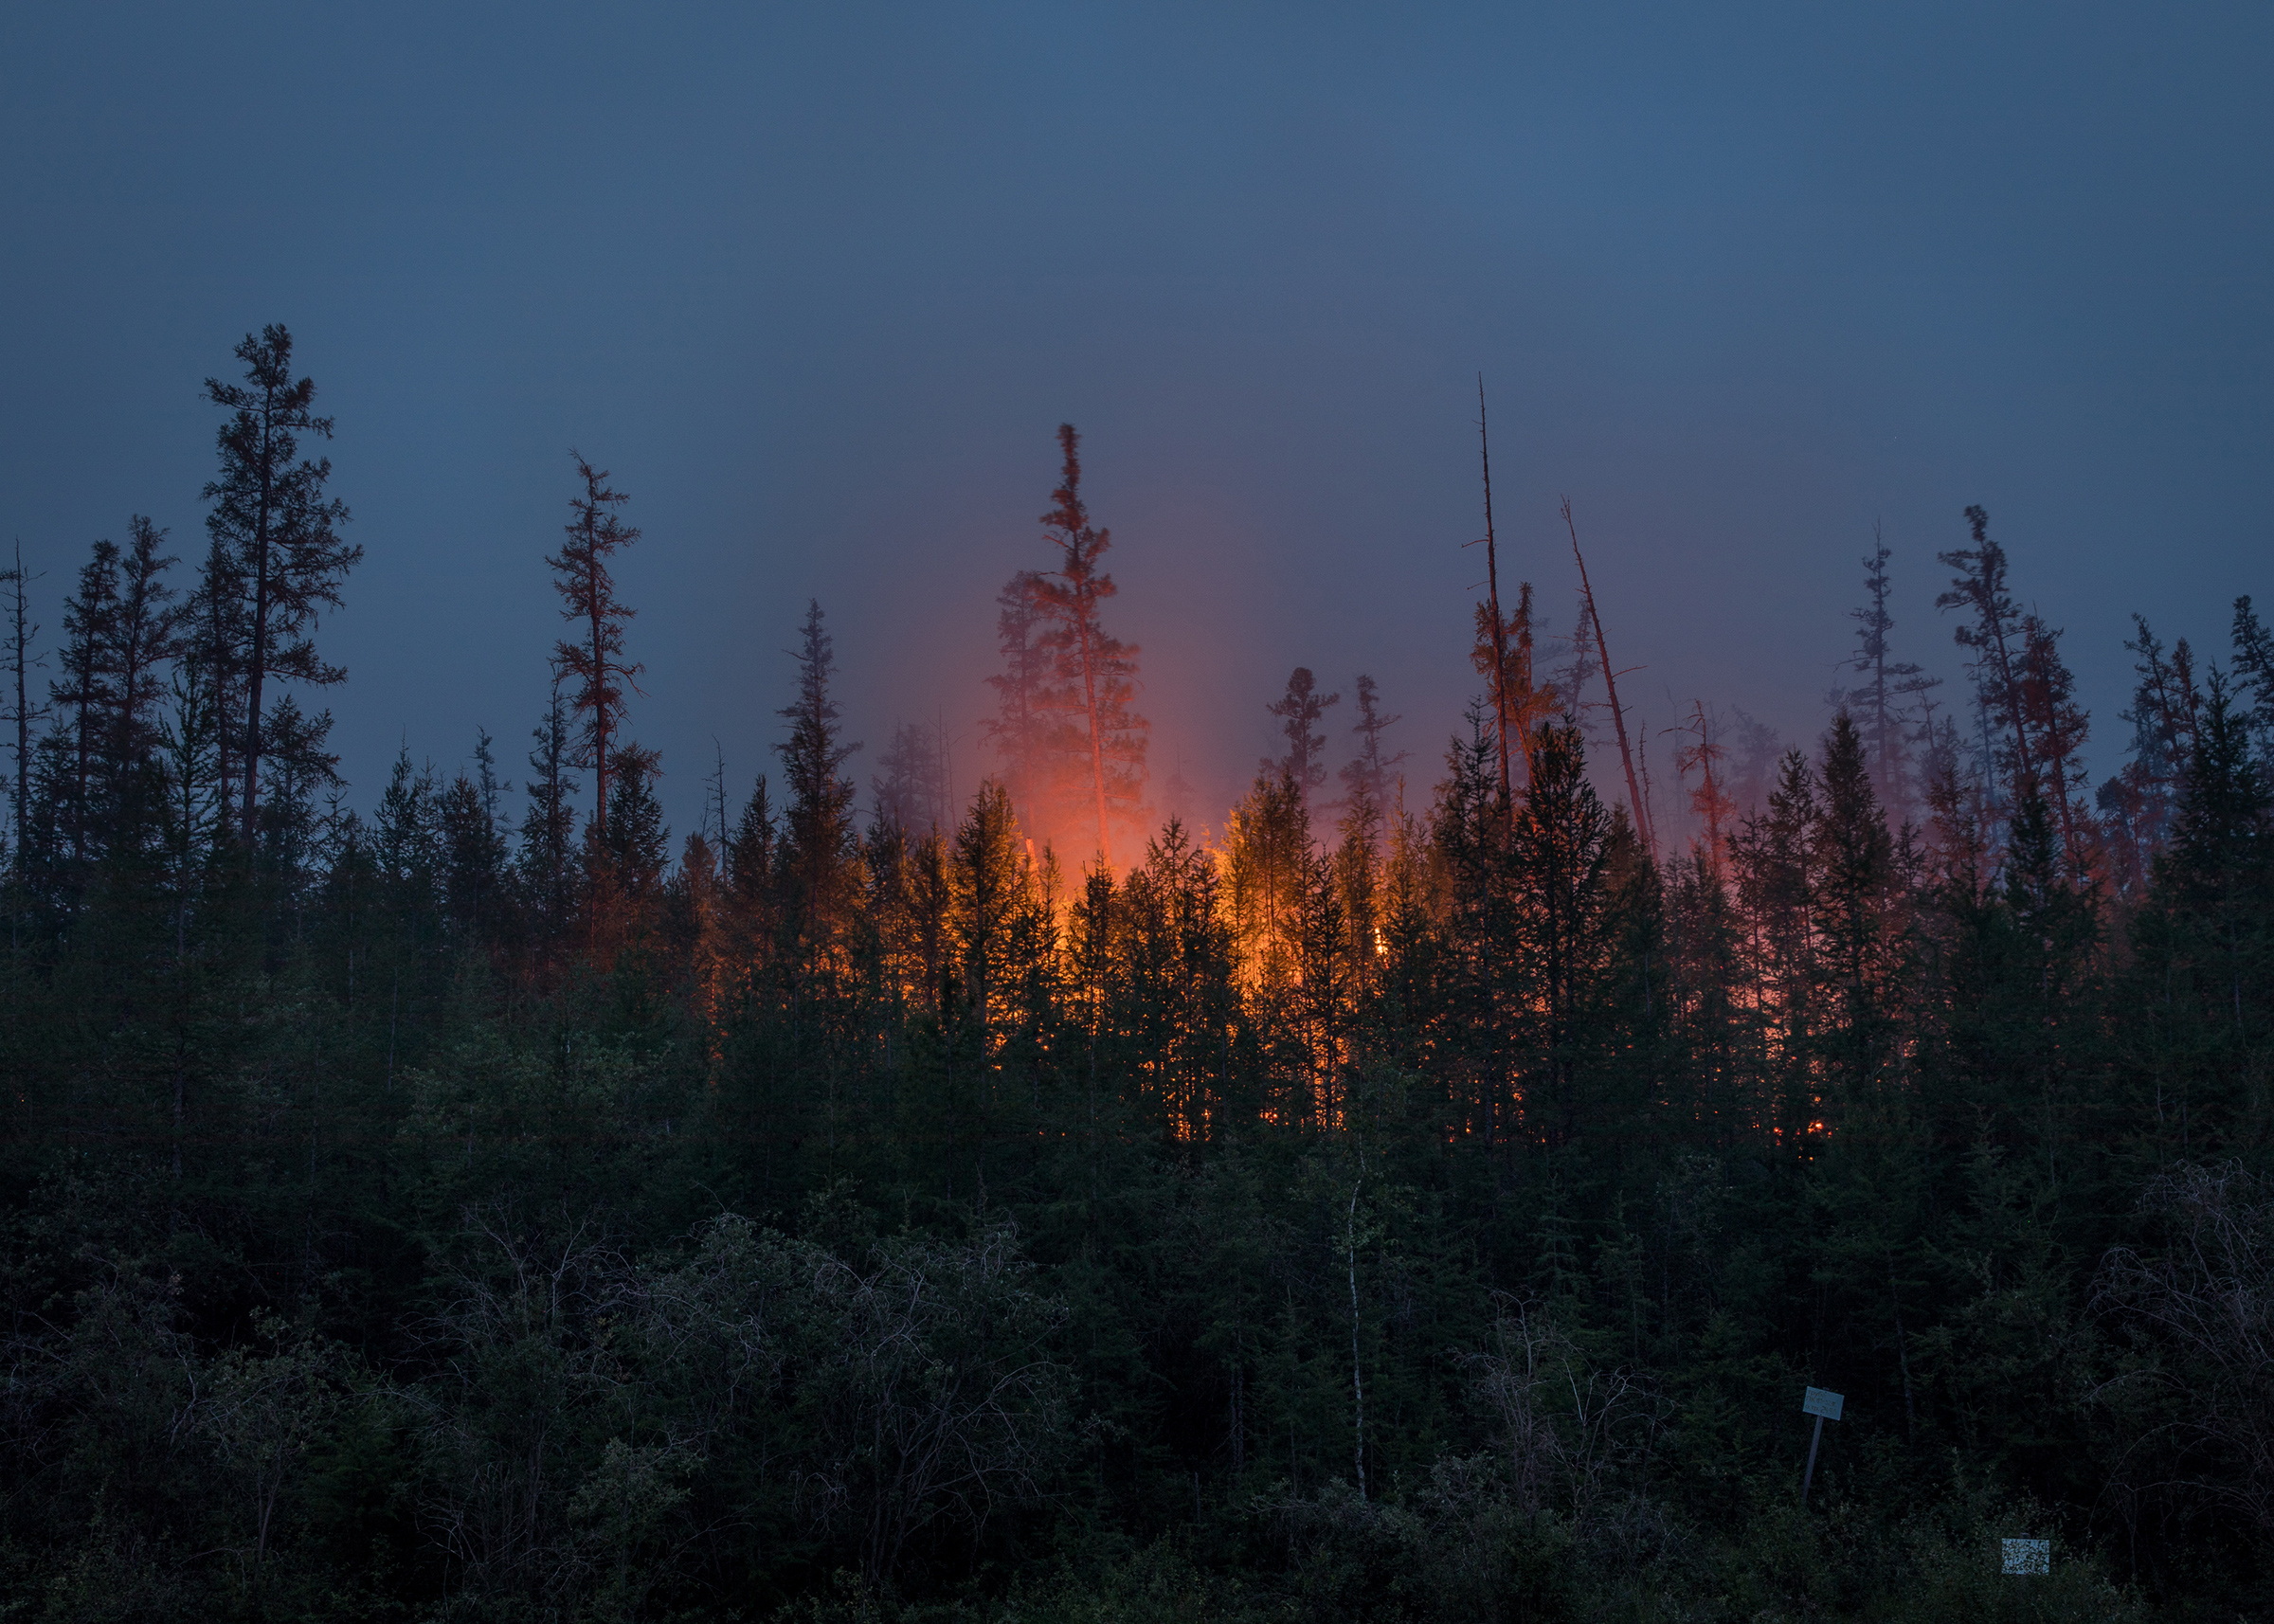 A forest fire along the Viluy highway between Yakutsk, the capital of Yakutia, and Berdigestyakh on July 16. (Alexey Vasilyev)